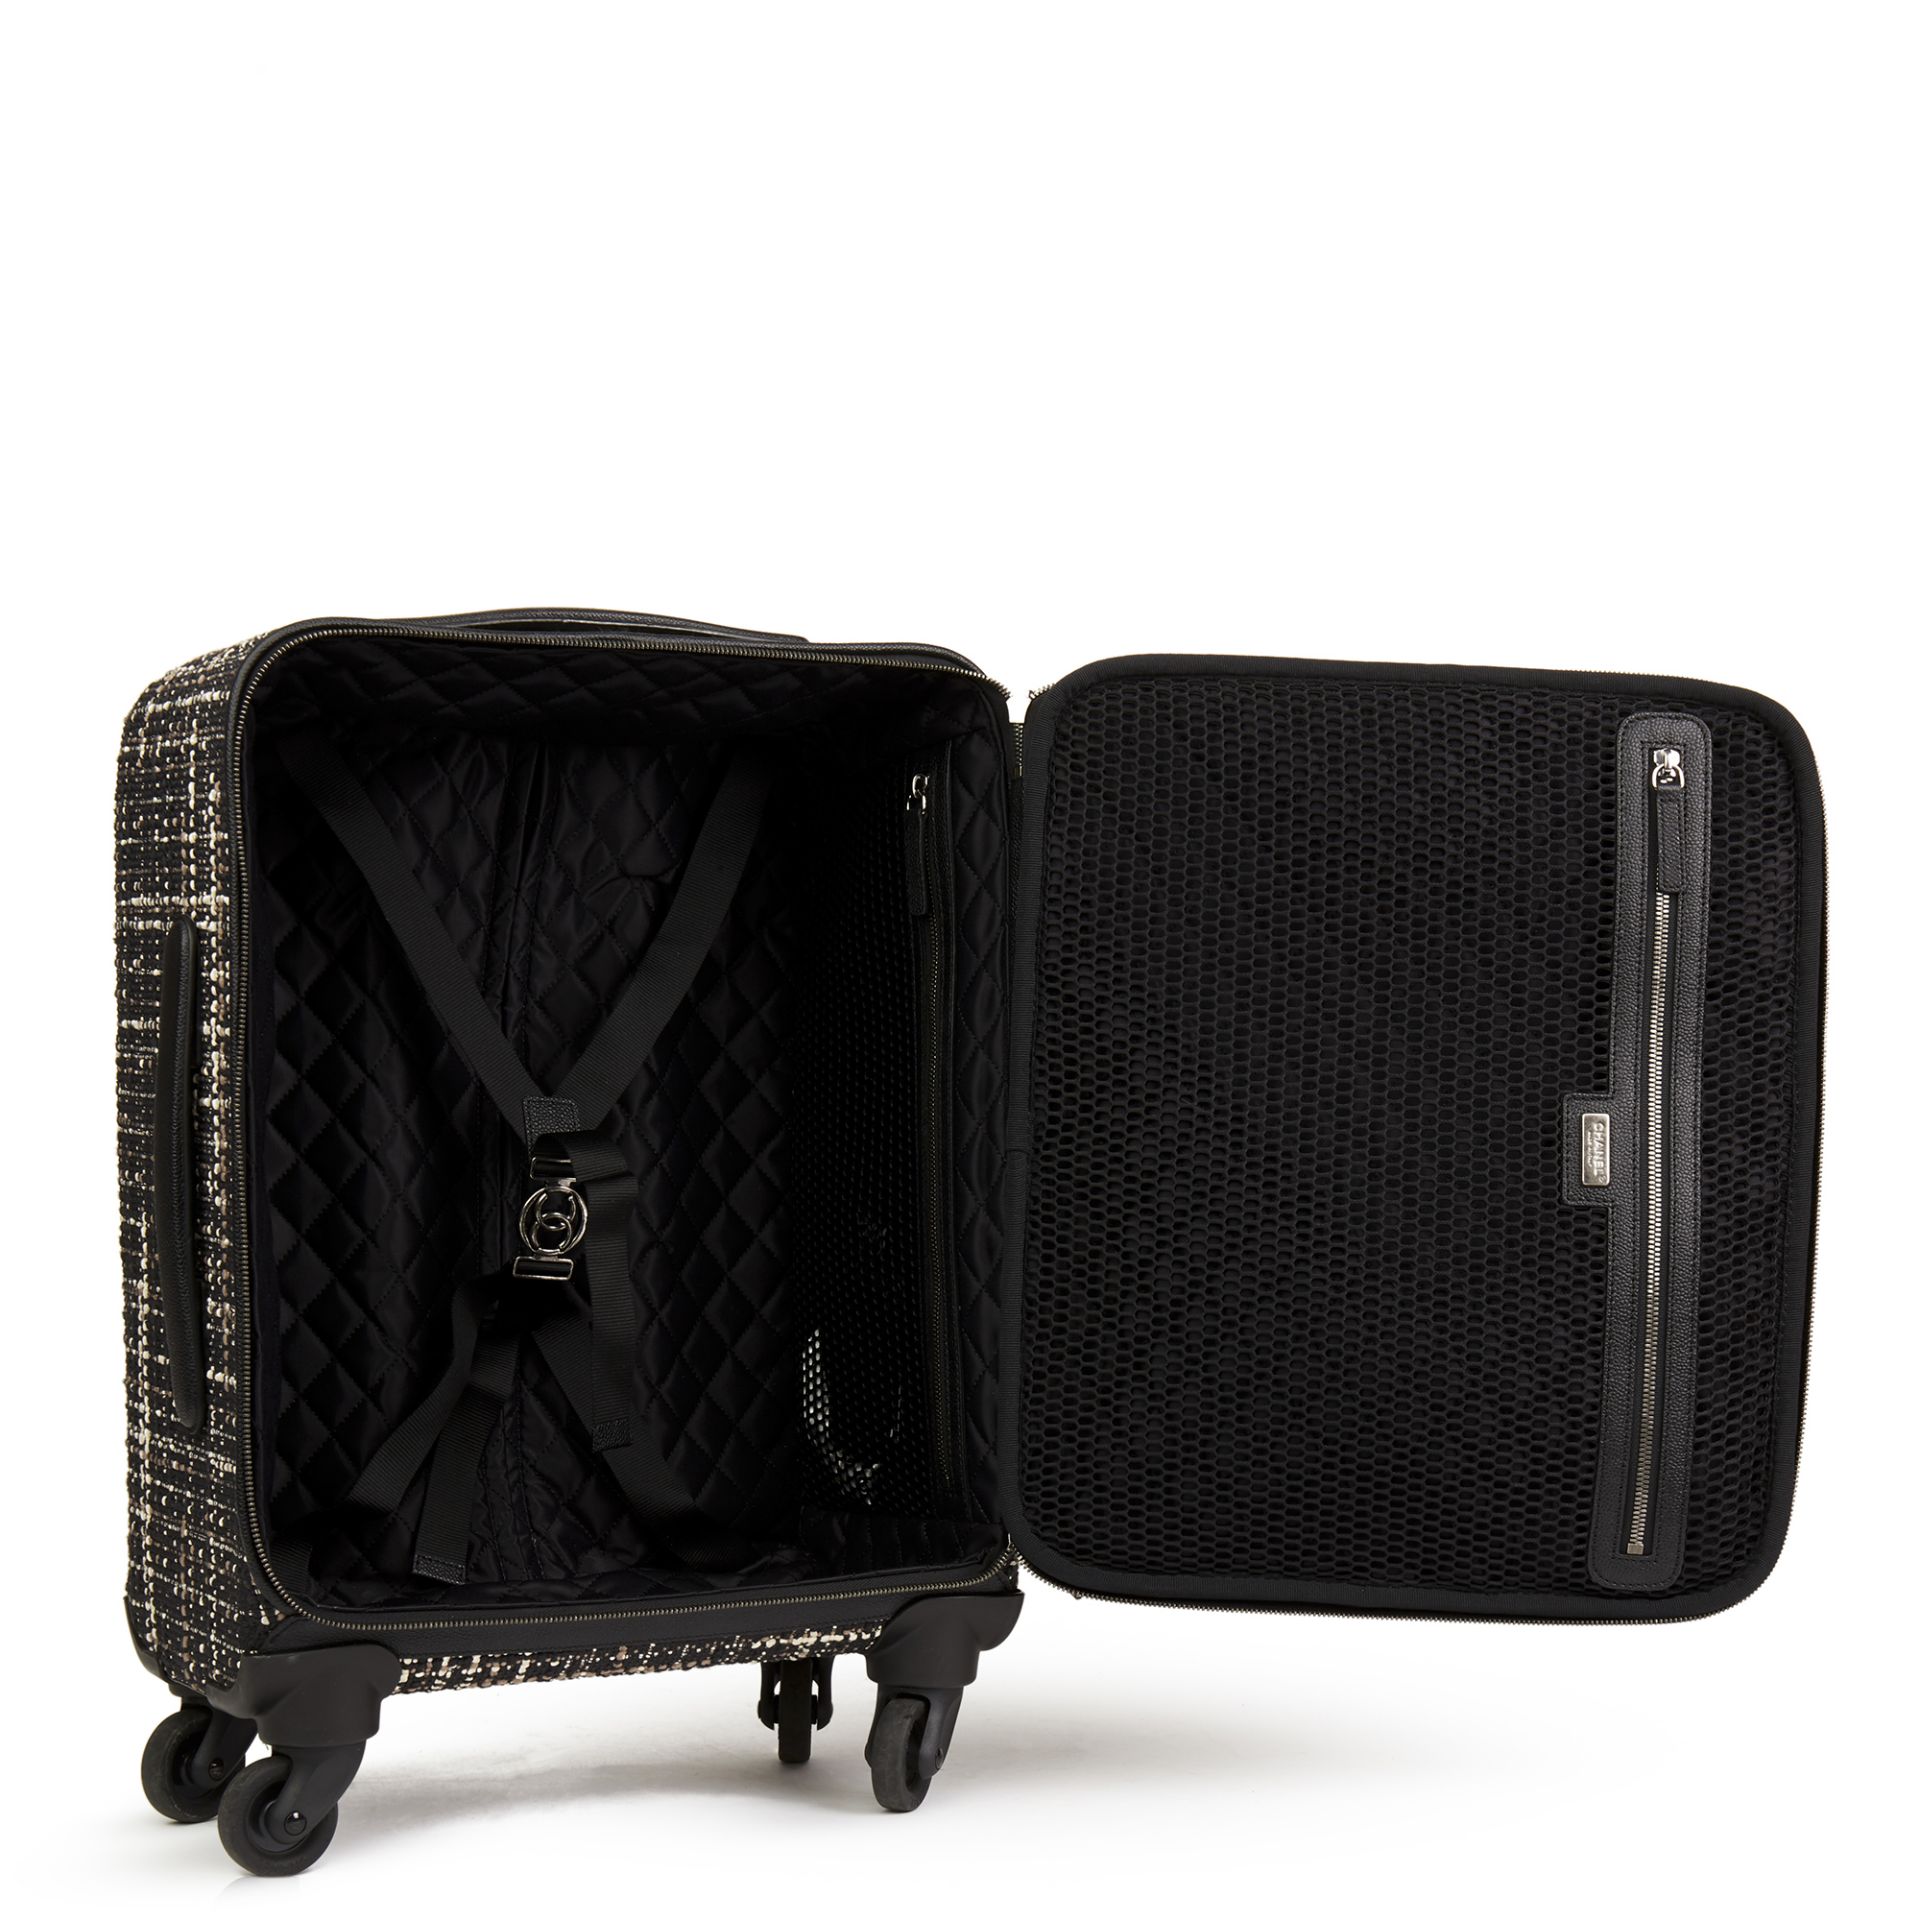 Chanel Jacket Trolley Rolling Suitcase - Image 4 of 13